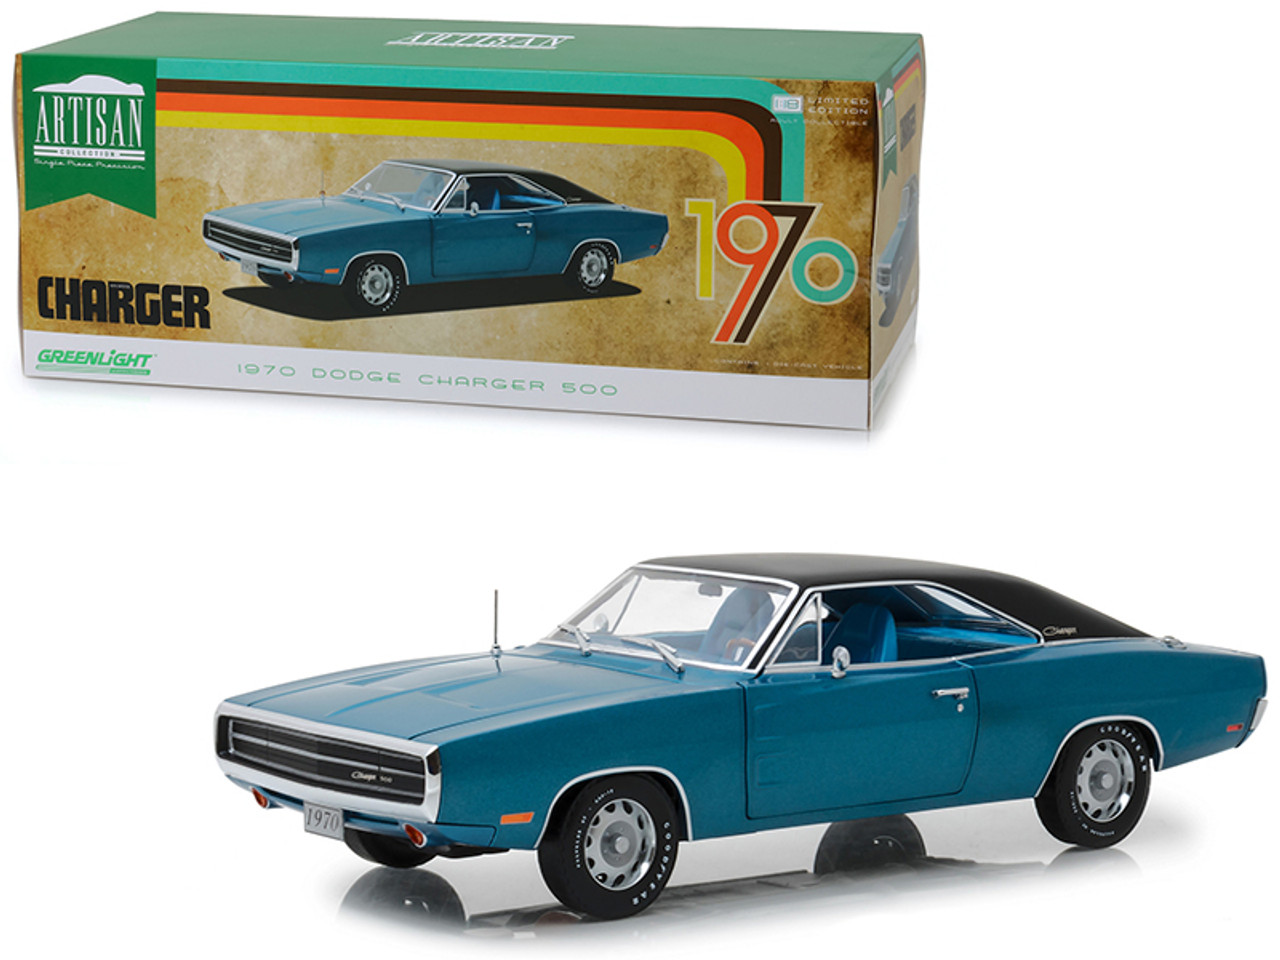 1970 Dodge Charger 500 Blue Metallic with Black Top and Blue Interior 1/18 Diecast Model Car by Greenlight